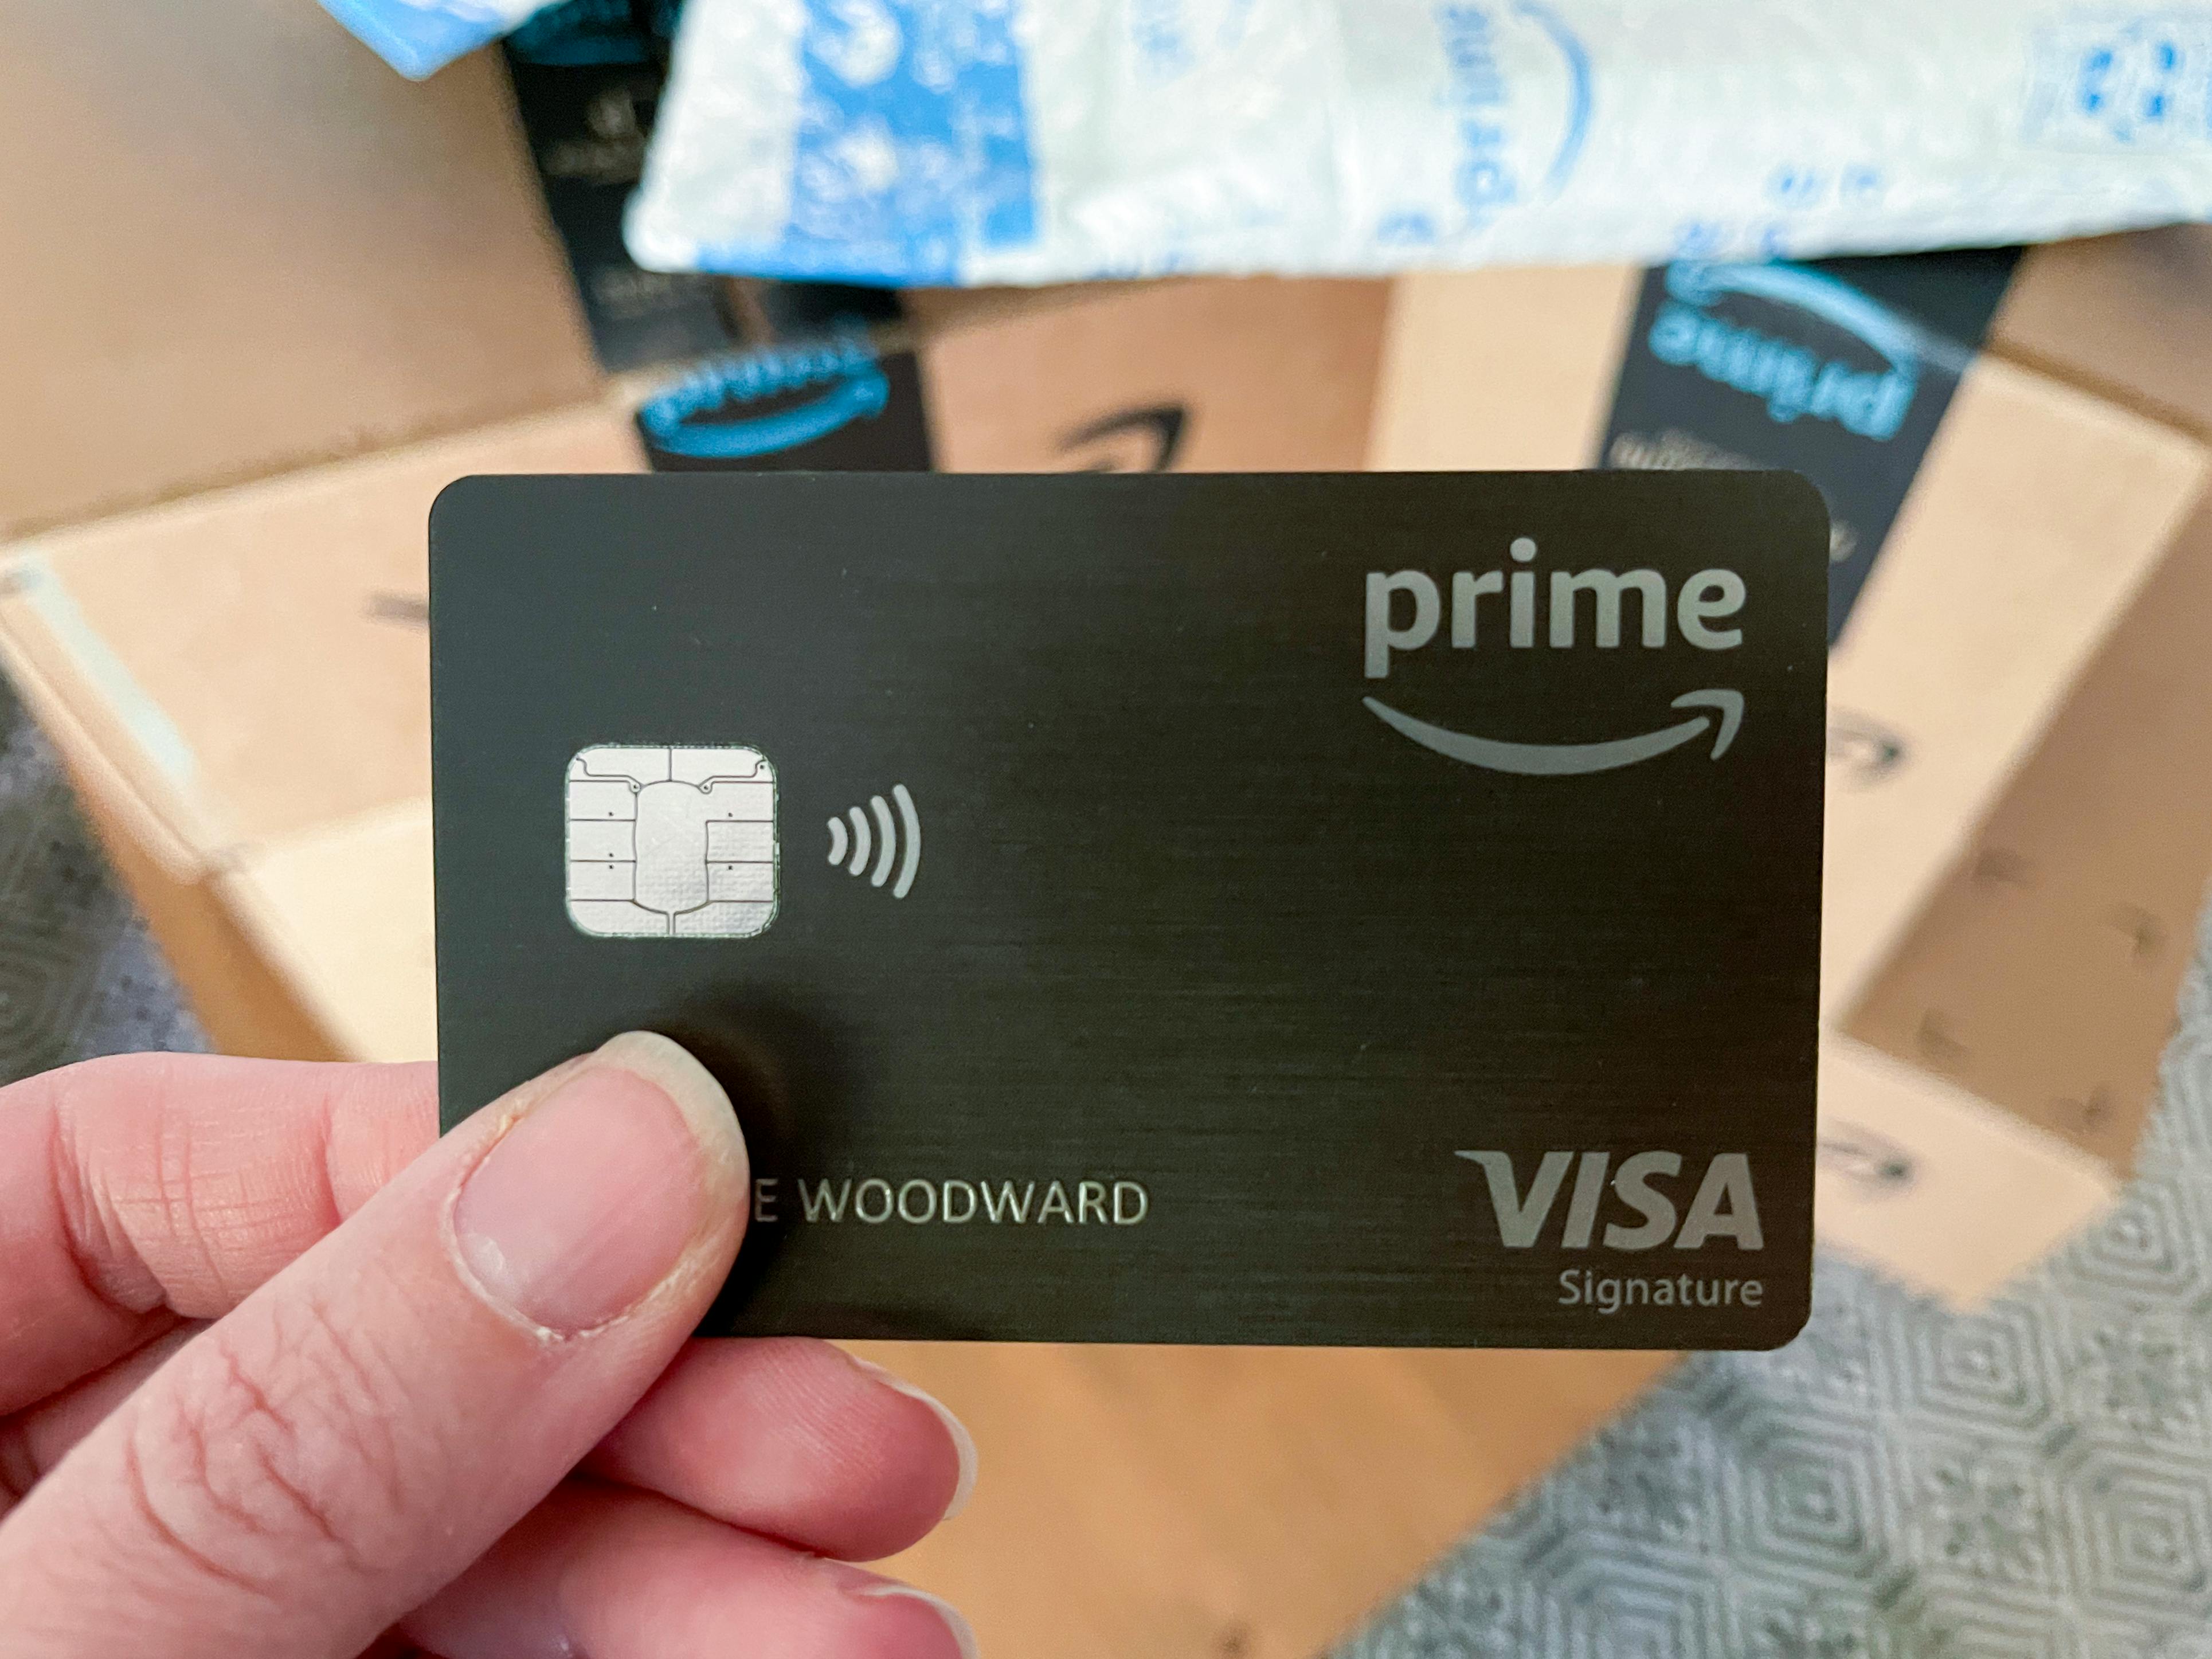 A person holding an amazon prime visa credit card.